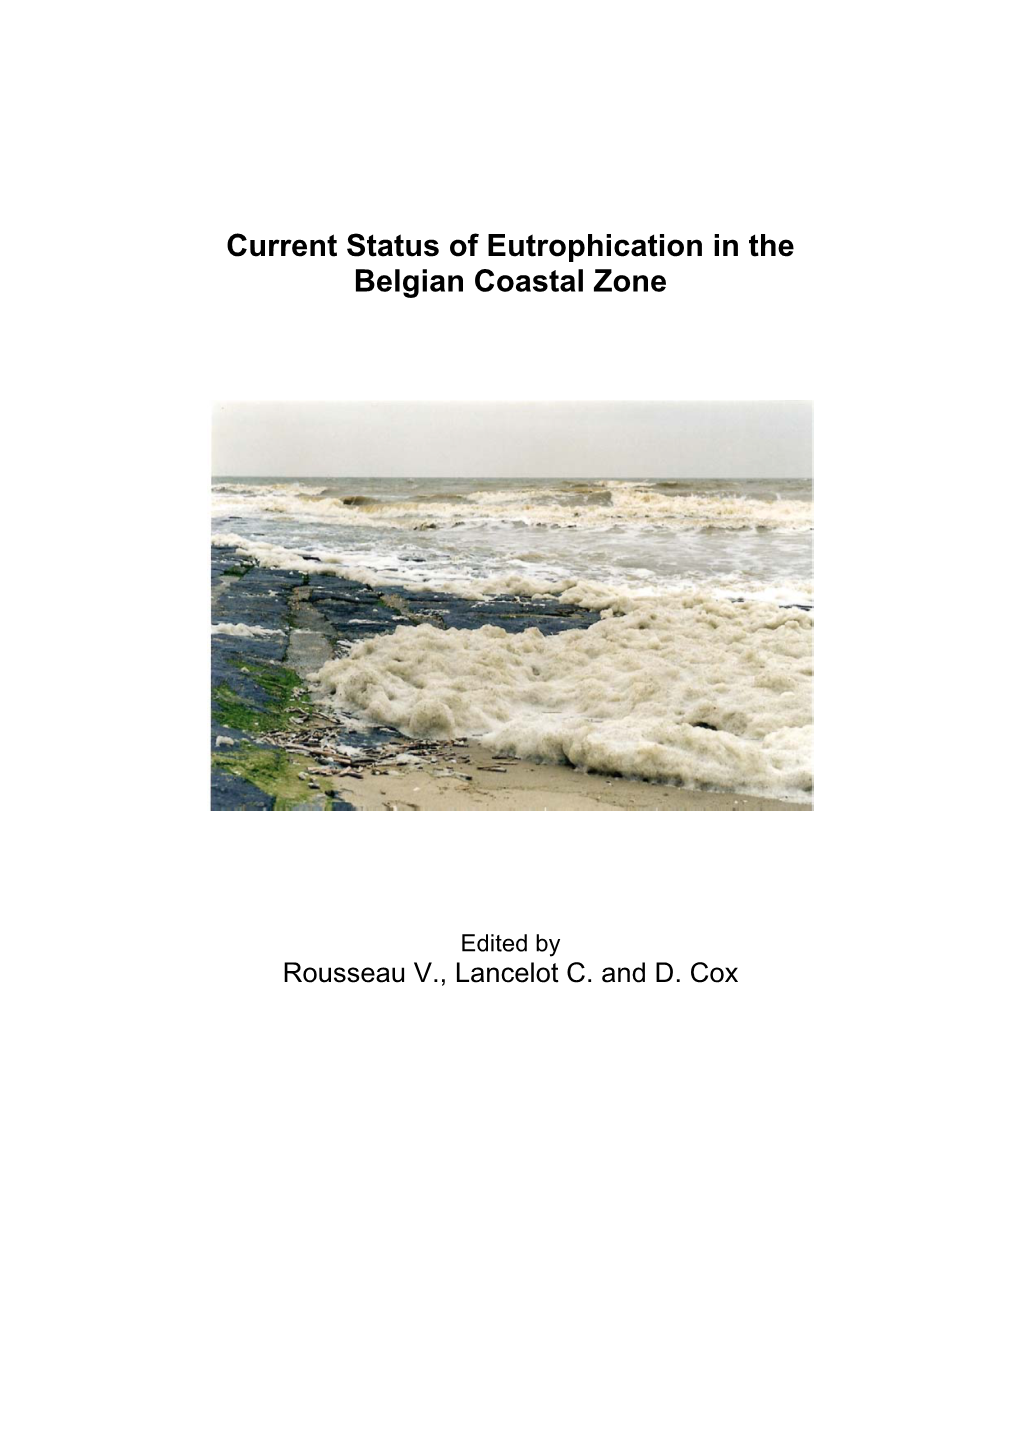 Current Status of Eutrophication in the Belgian Coastal Zone